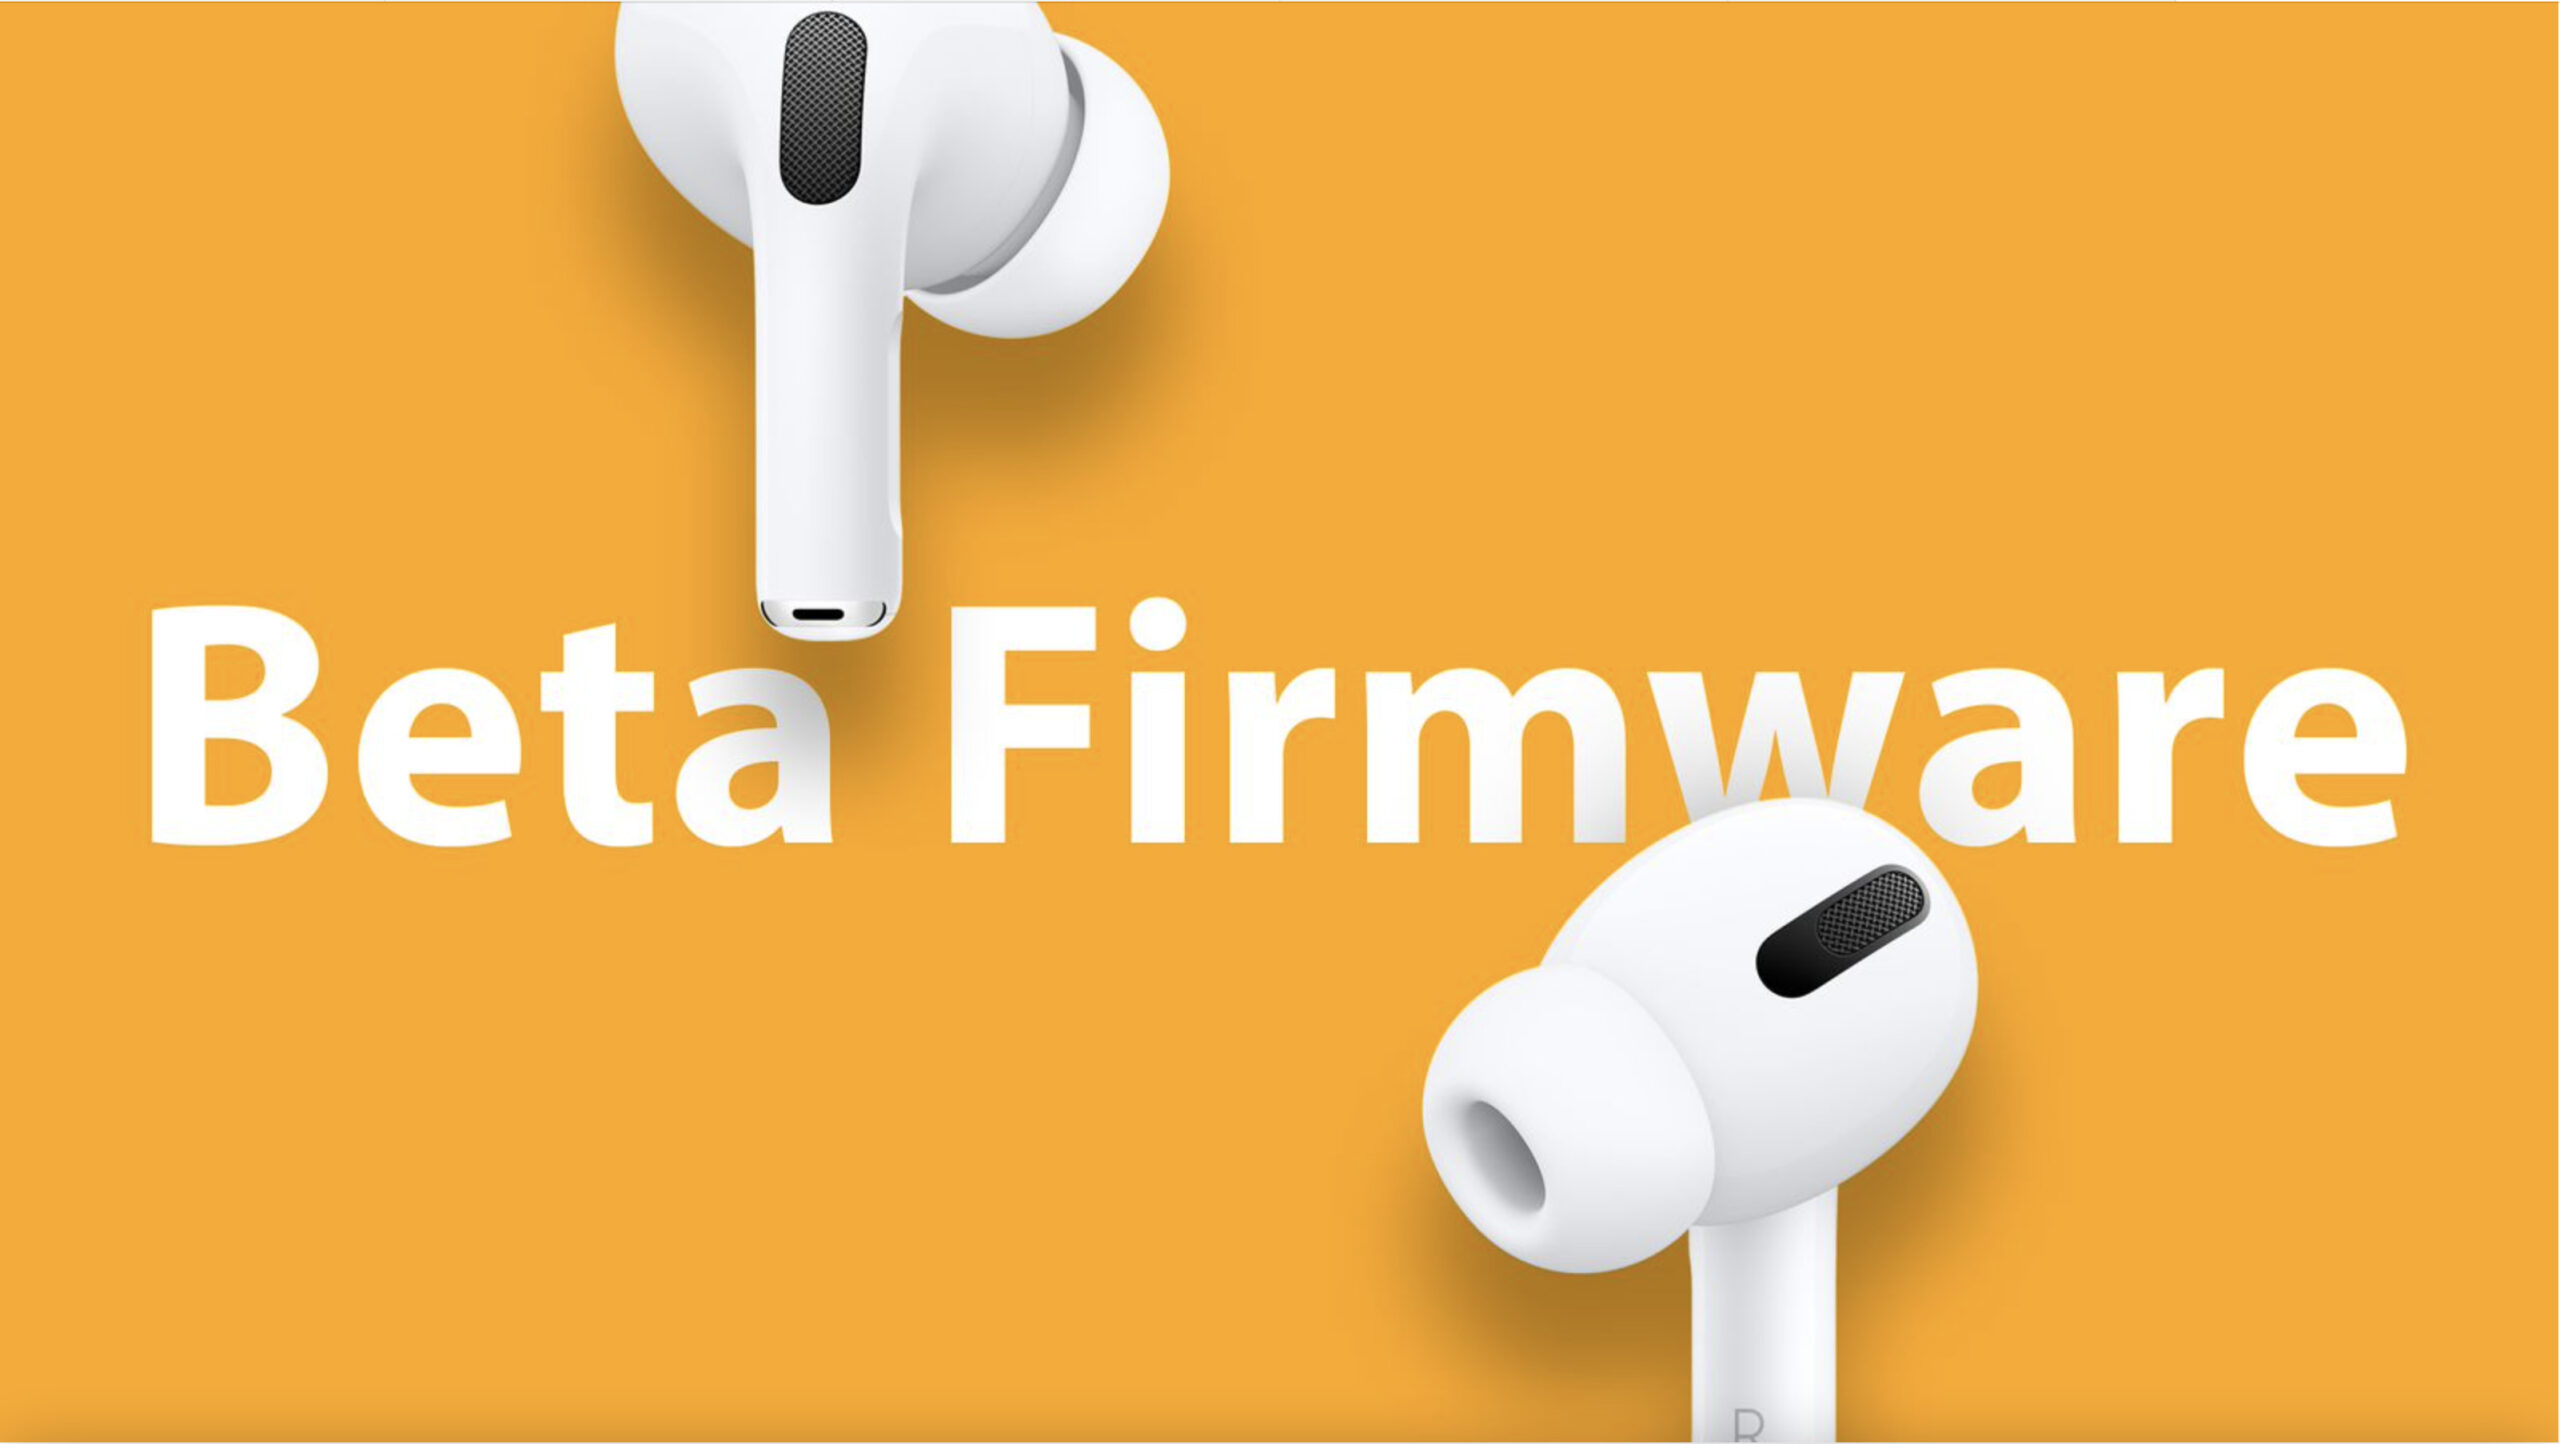 How to Install Apple's Beta Firmware on AirPods Pro